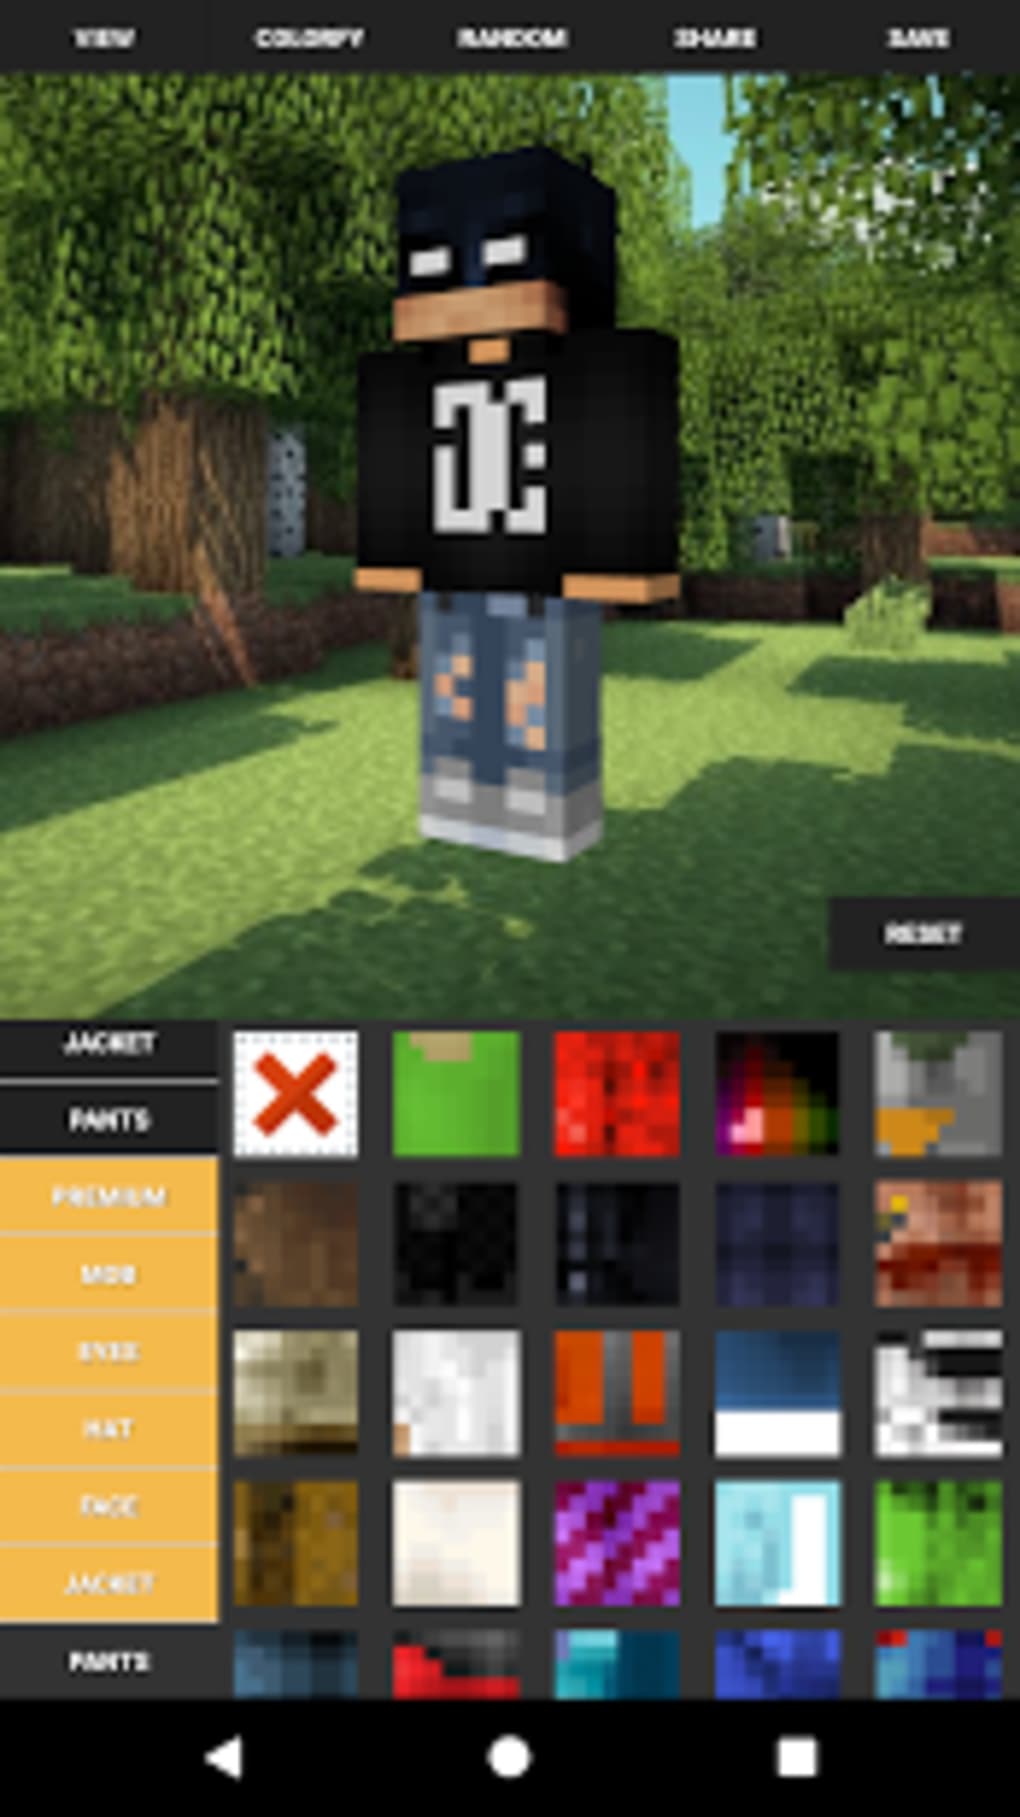 Custom Skin Creator Minecraft Apk Download for Android- Latest version  5.1.6- net.digitalageservices.minecraftyourself